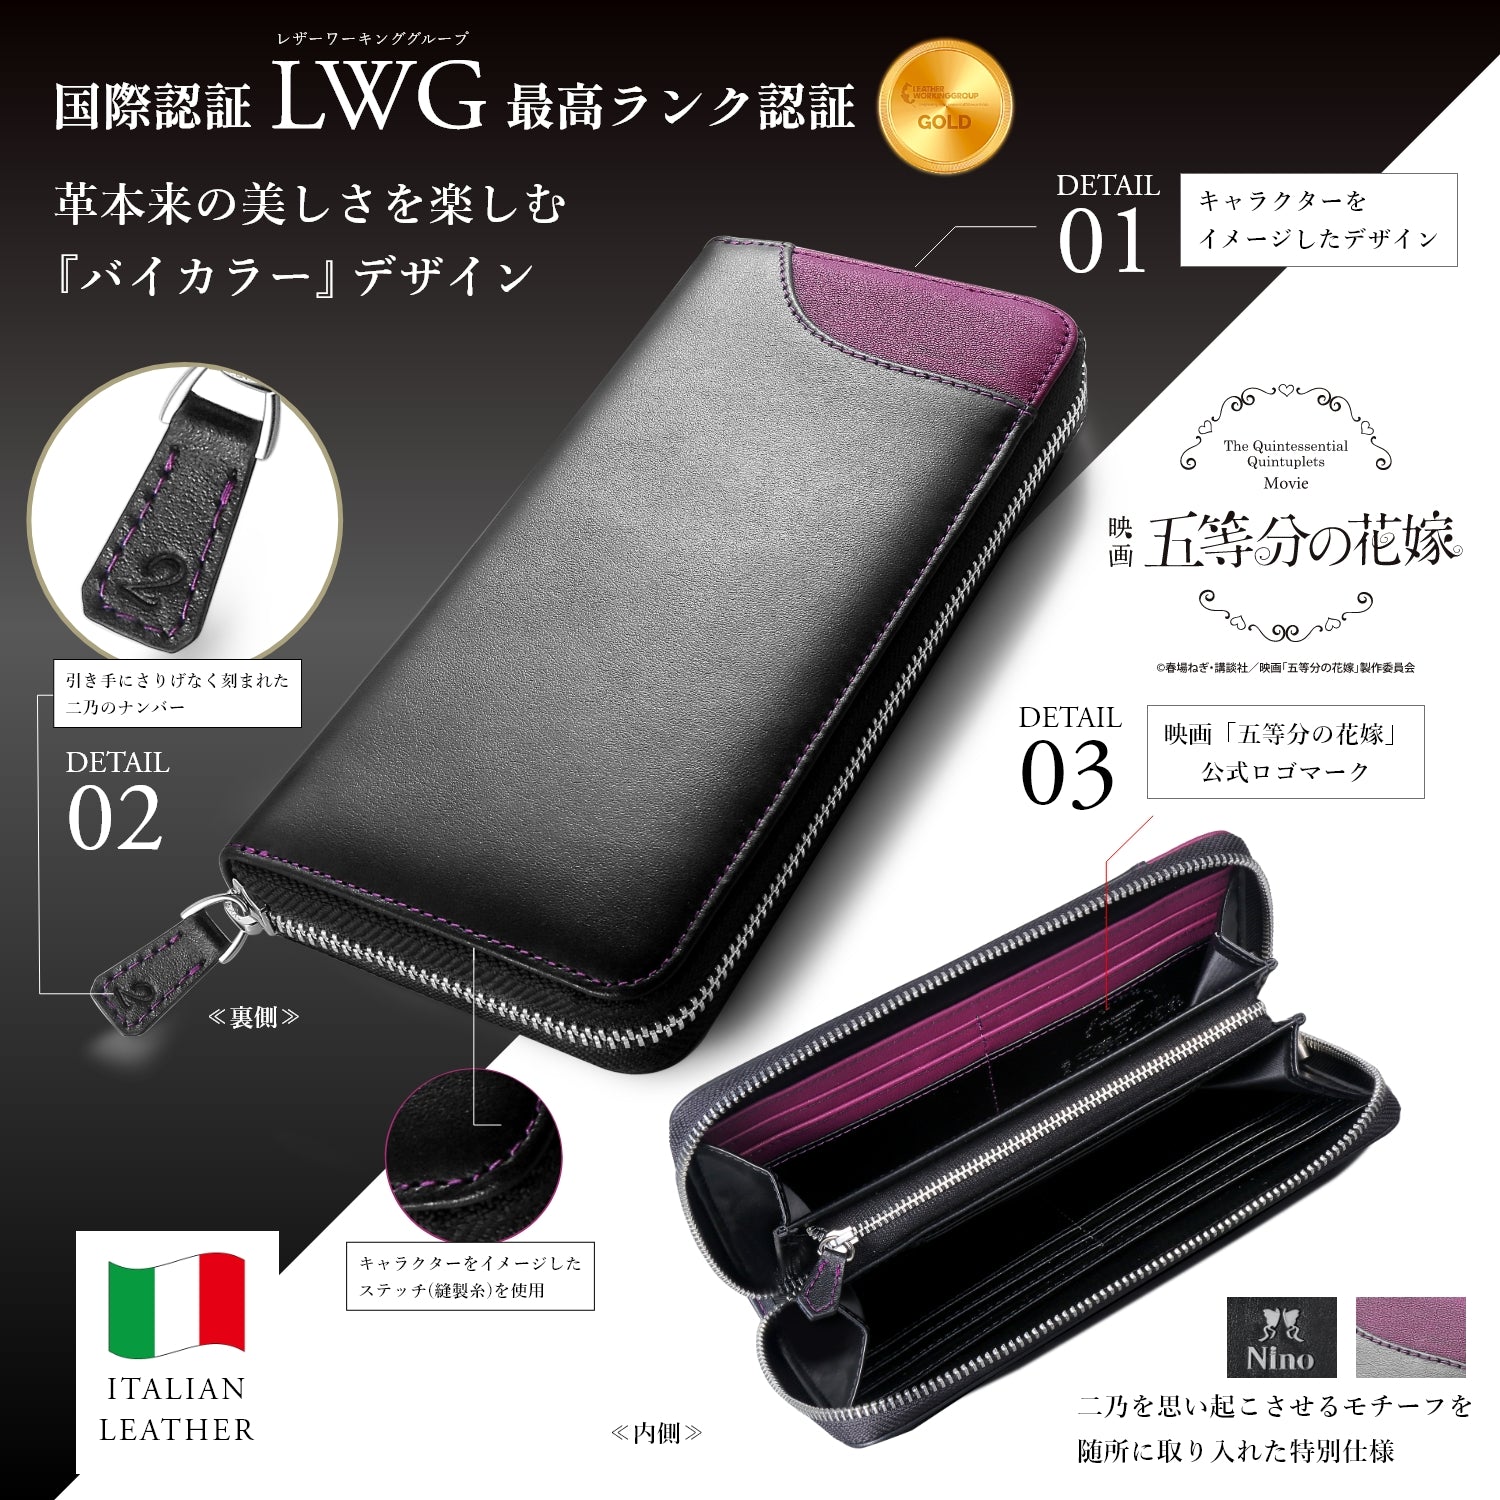 The Quintessential Quintuplets Movie Italian Leather Wallet | Nino Nakano Model